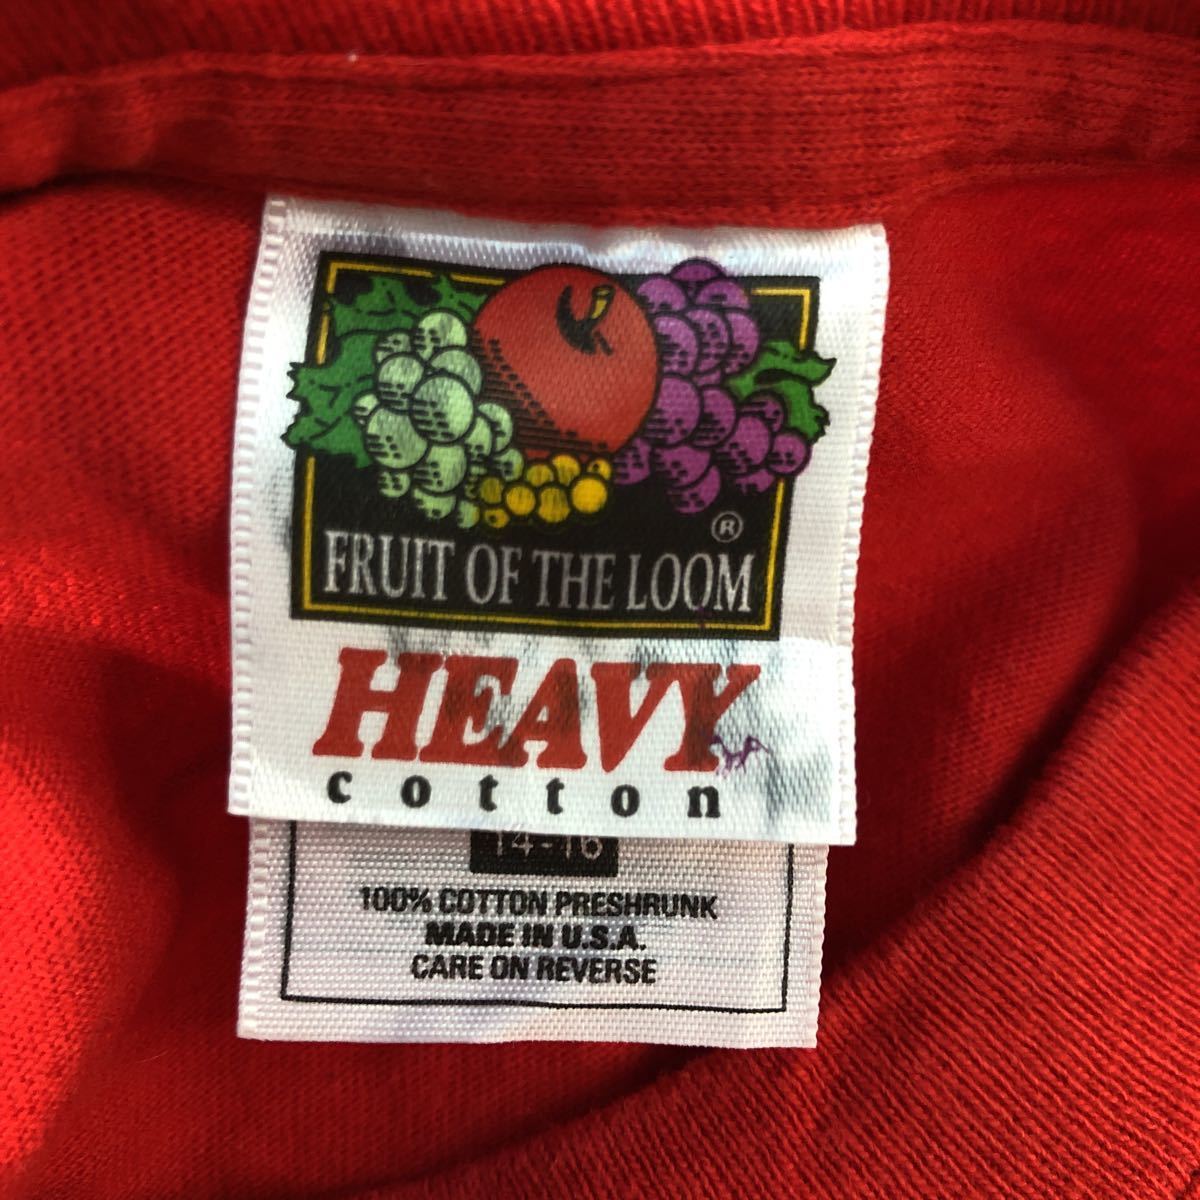 FRUIT OF THE LOOM 半袖 プリントTシャツ 14-16 140～ レッド ホワイト キッズ アメリカ製 古着卸 アメリカ仕入 a508-5014_画像7